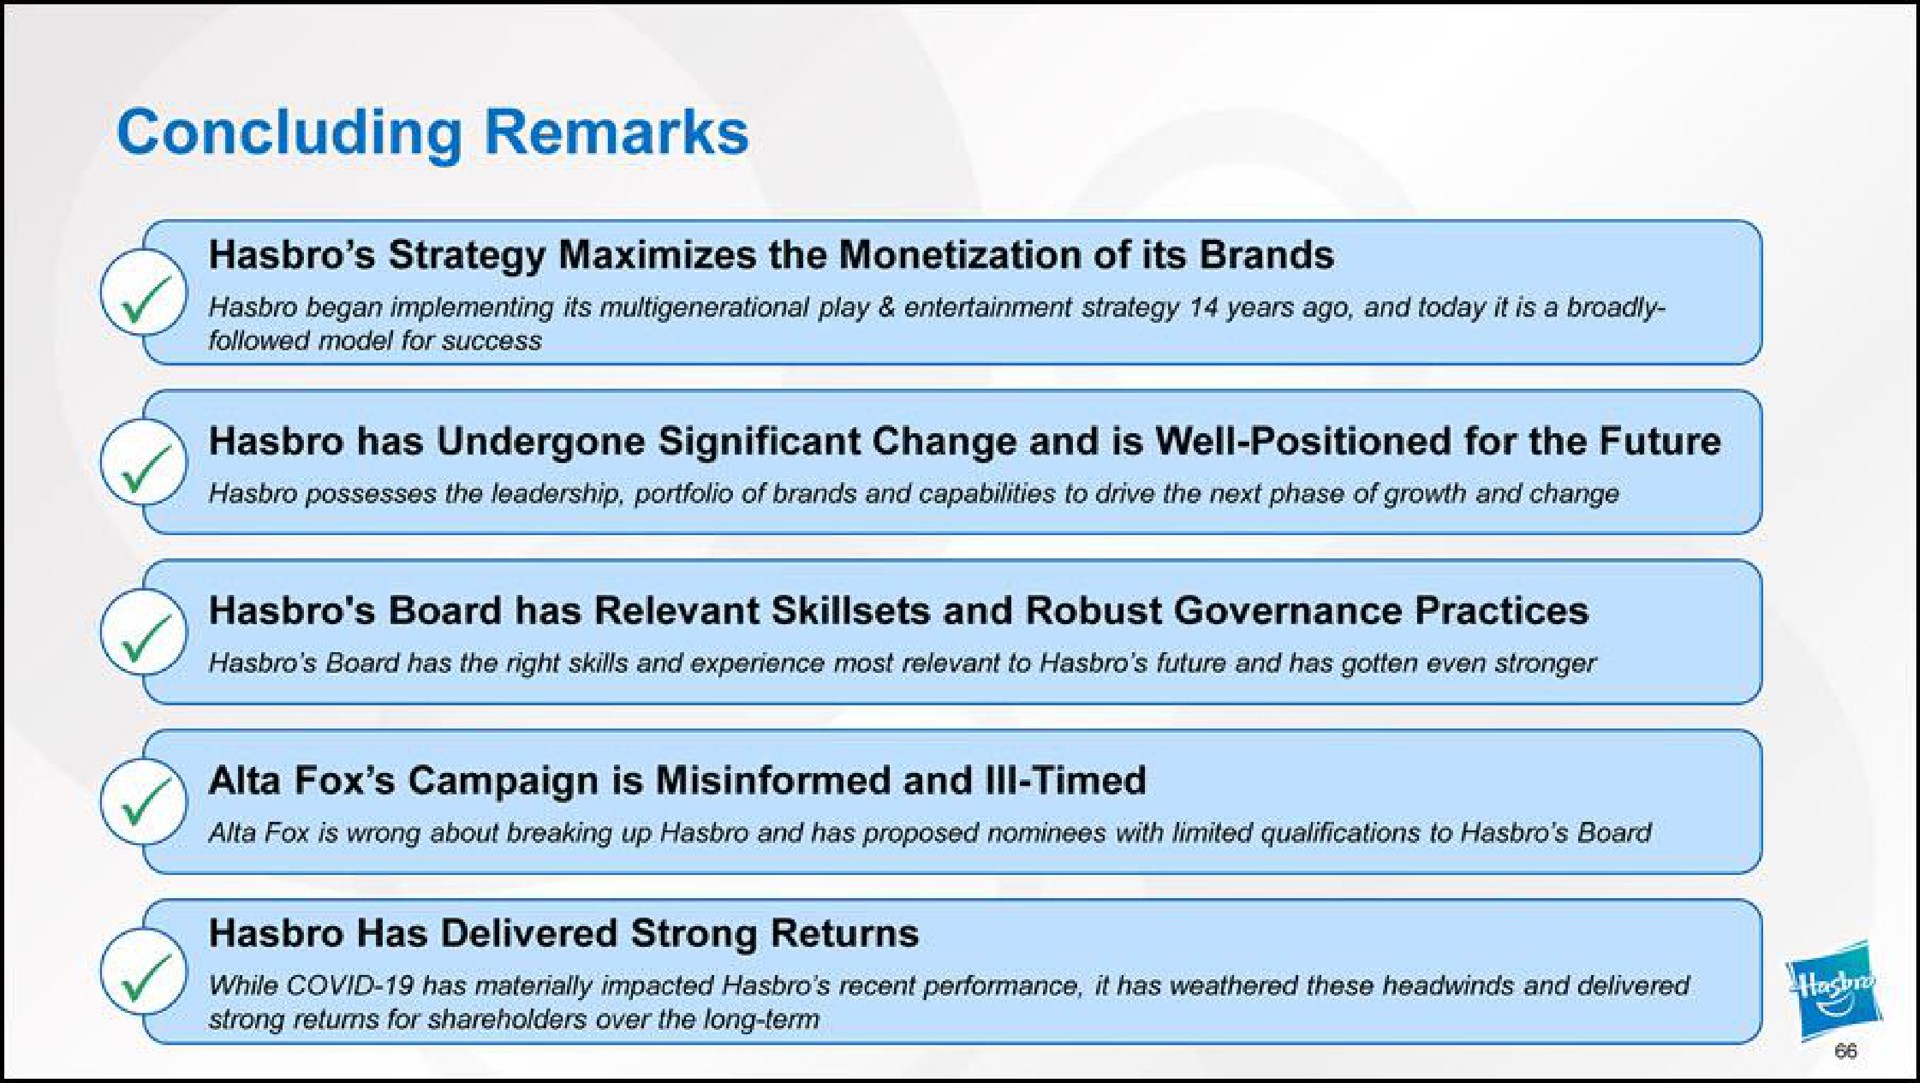 concluding remarks strategy maximizes the monetization of its brands has undergone significant change and is well positioned for the future fox campaign is misinformed and ill timed board has relevant and robust governance practices has delivered strong returns | Hasbro